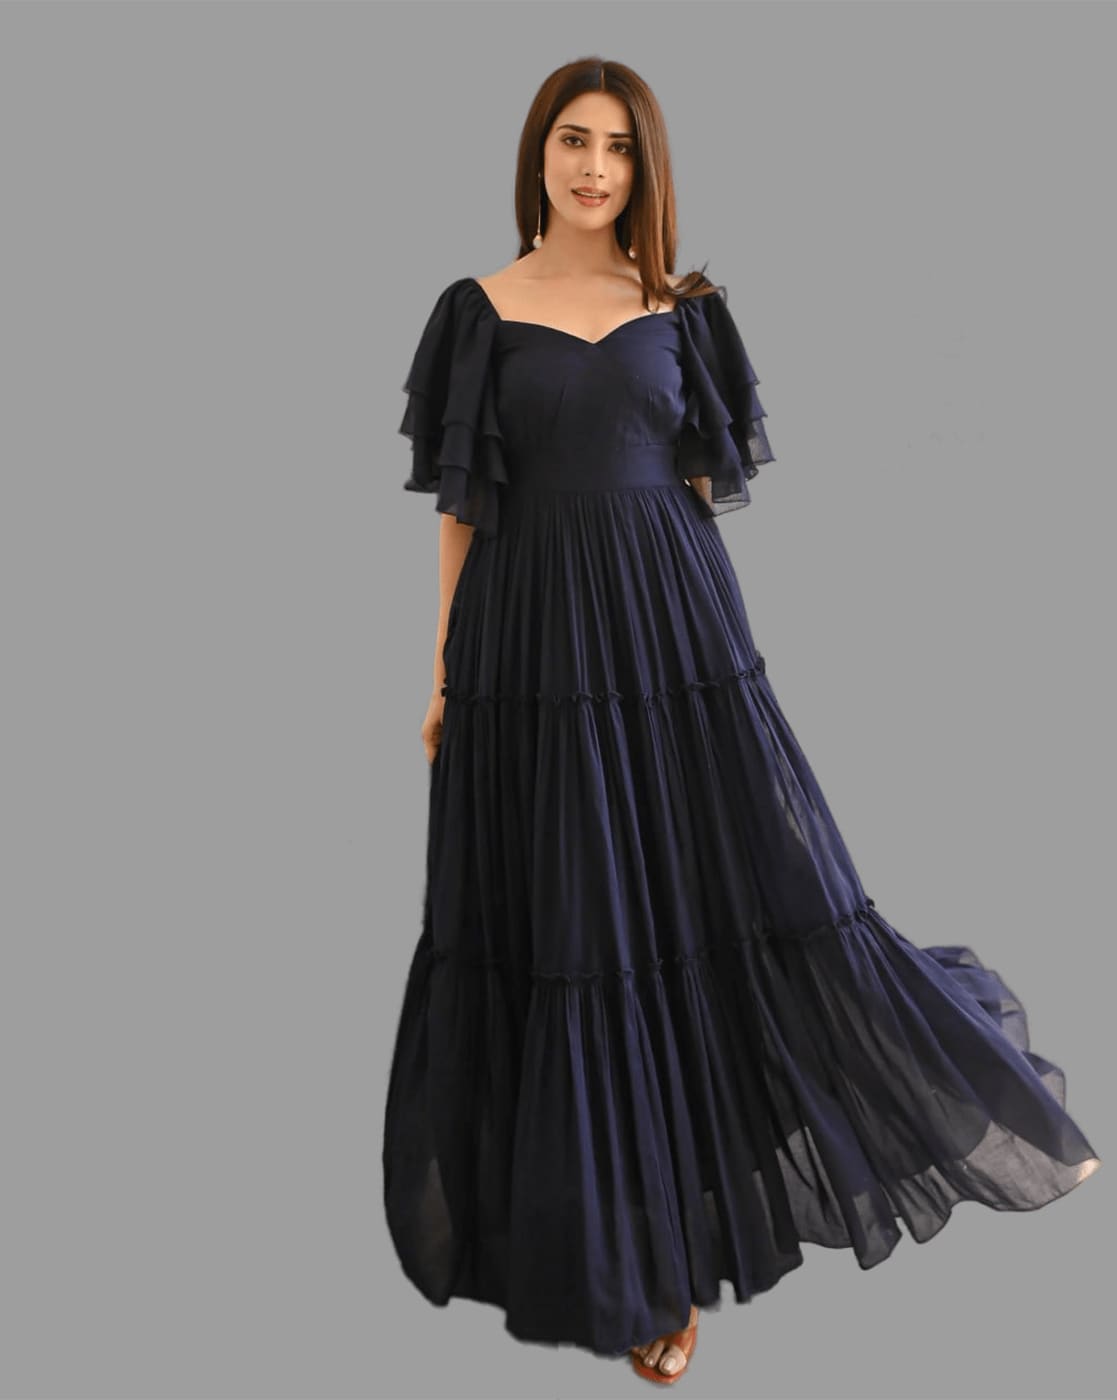 Formal Evening Gowns & Bridal Shower Dresses in Greenville SC | The  Poinsett Bride